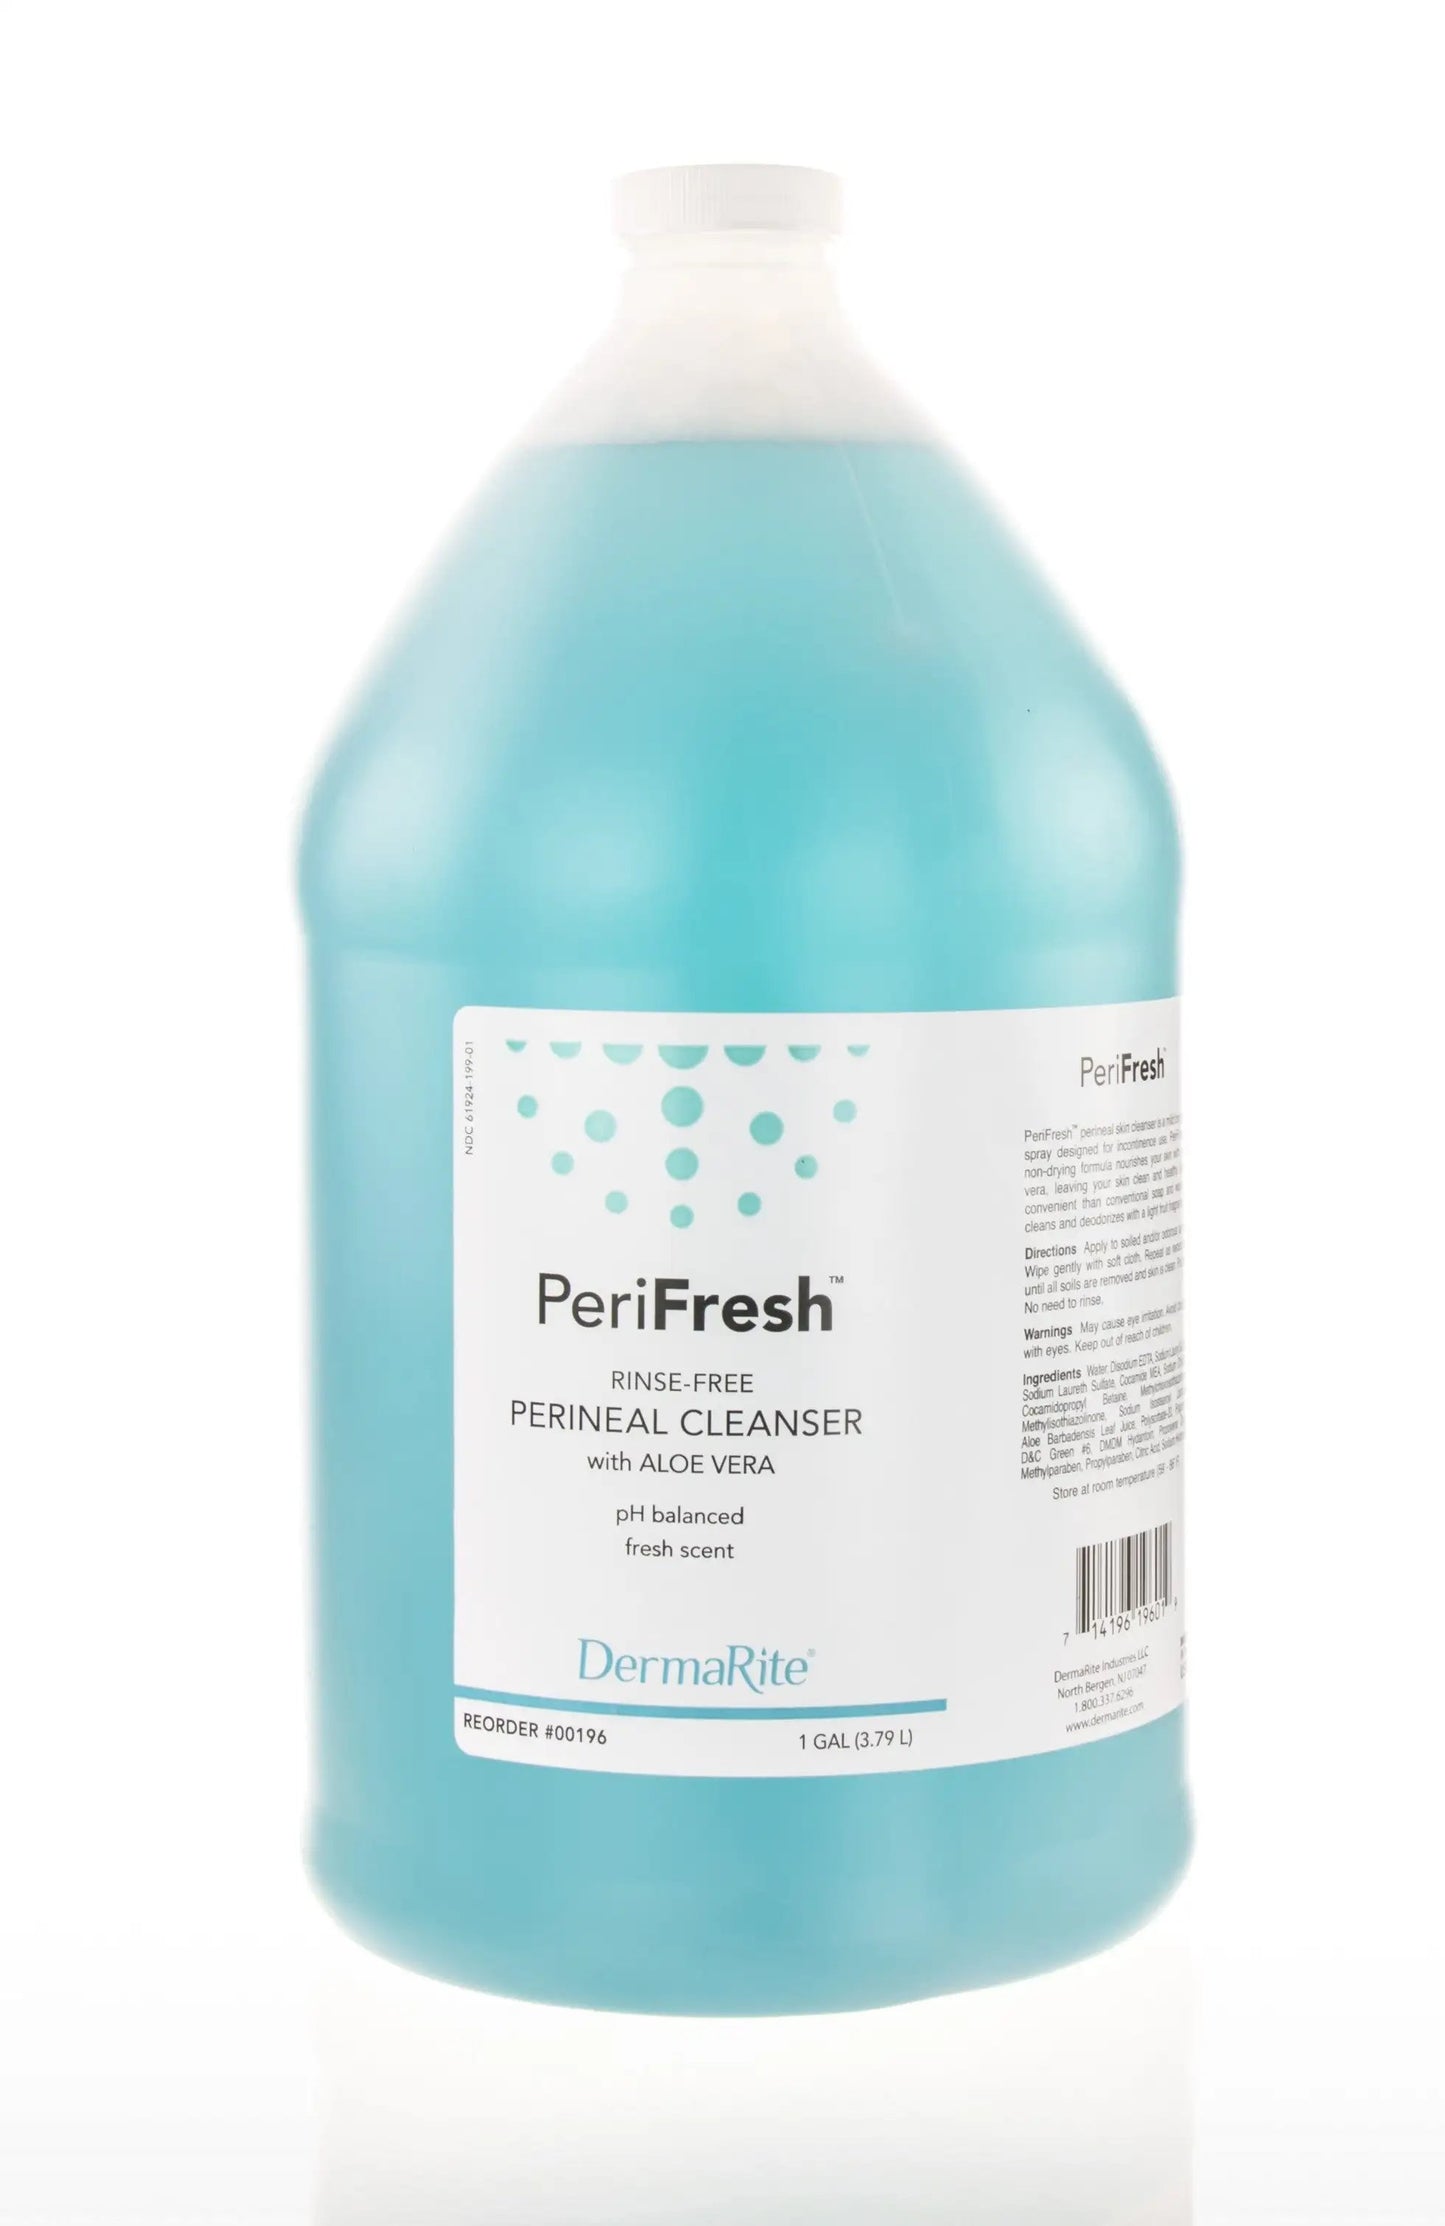 PeriFresh Rinse Free Perineal Cleanser, 1 Gallon - 00196